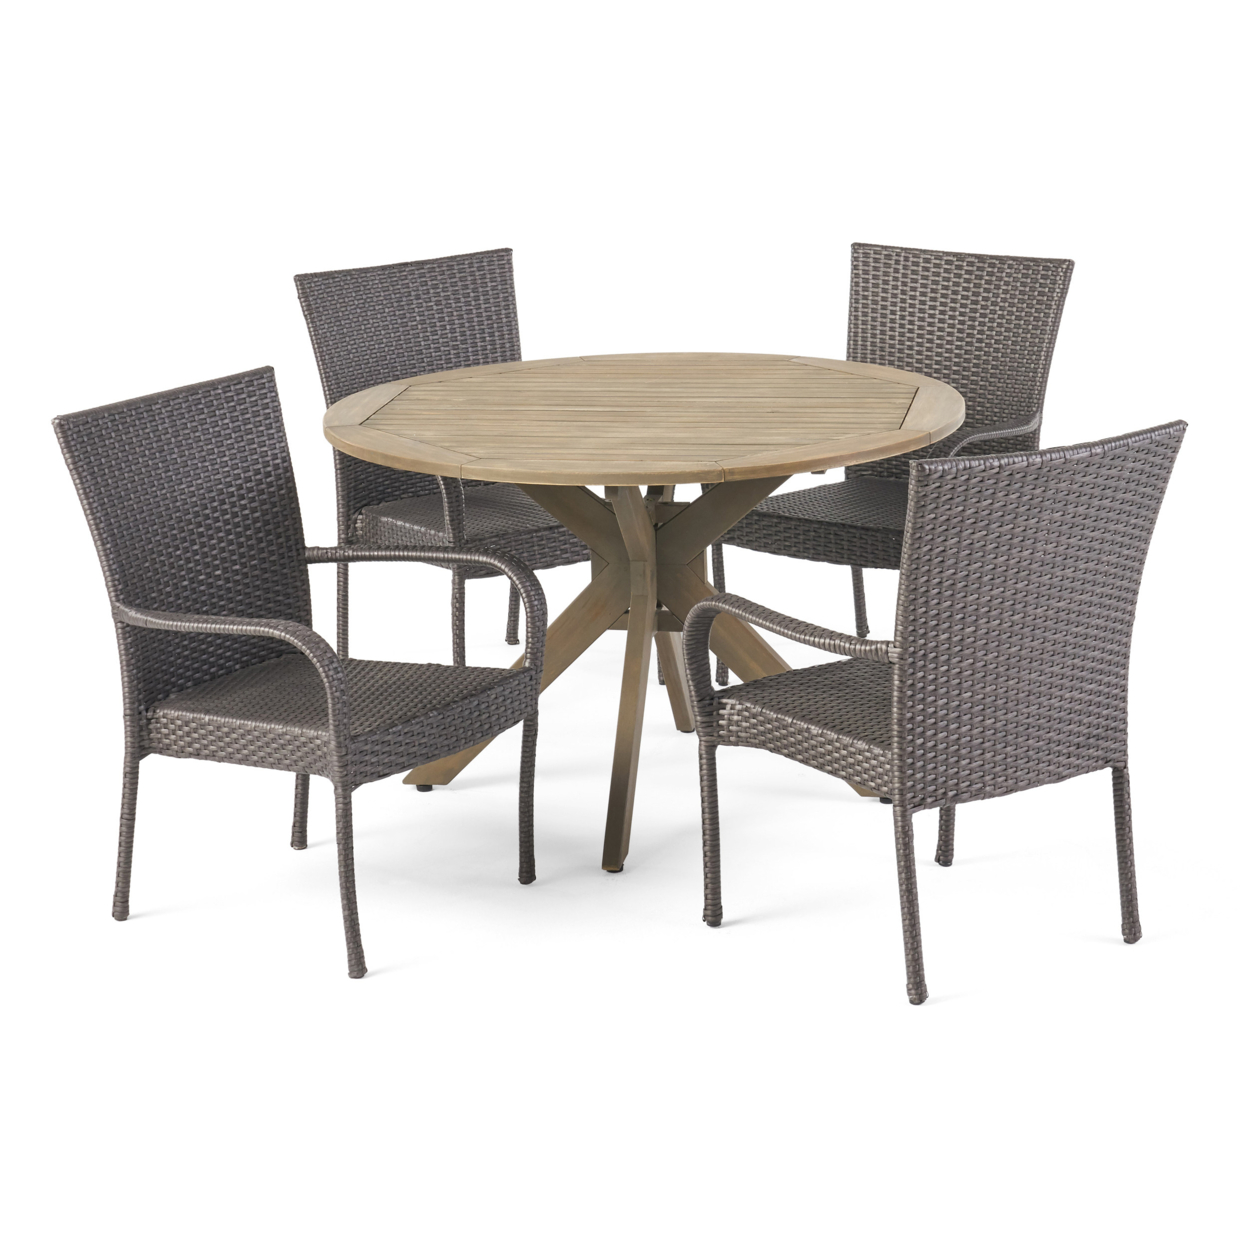 Murrary Outdoor 5 Piece Wood And Wicker Dining Set, Gray And Gray